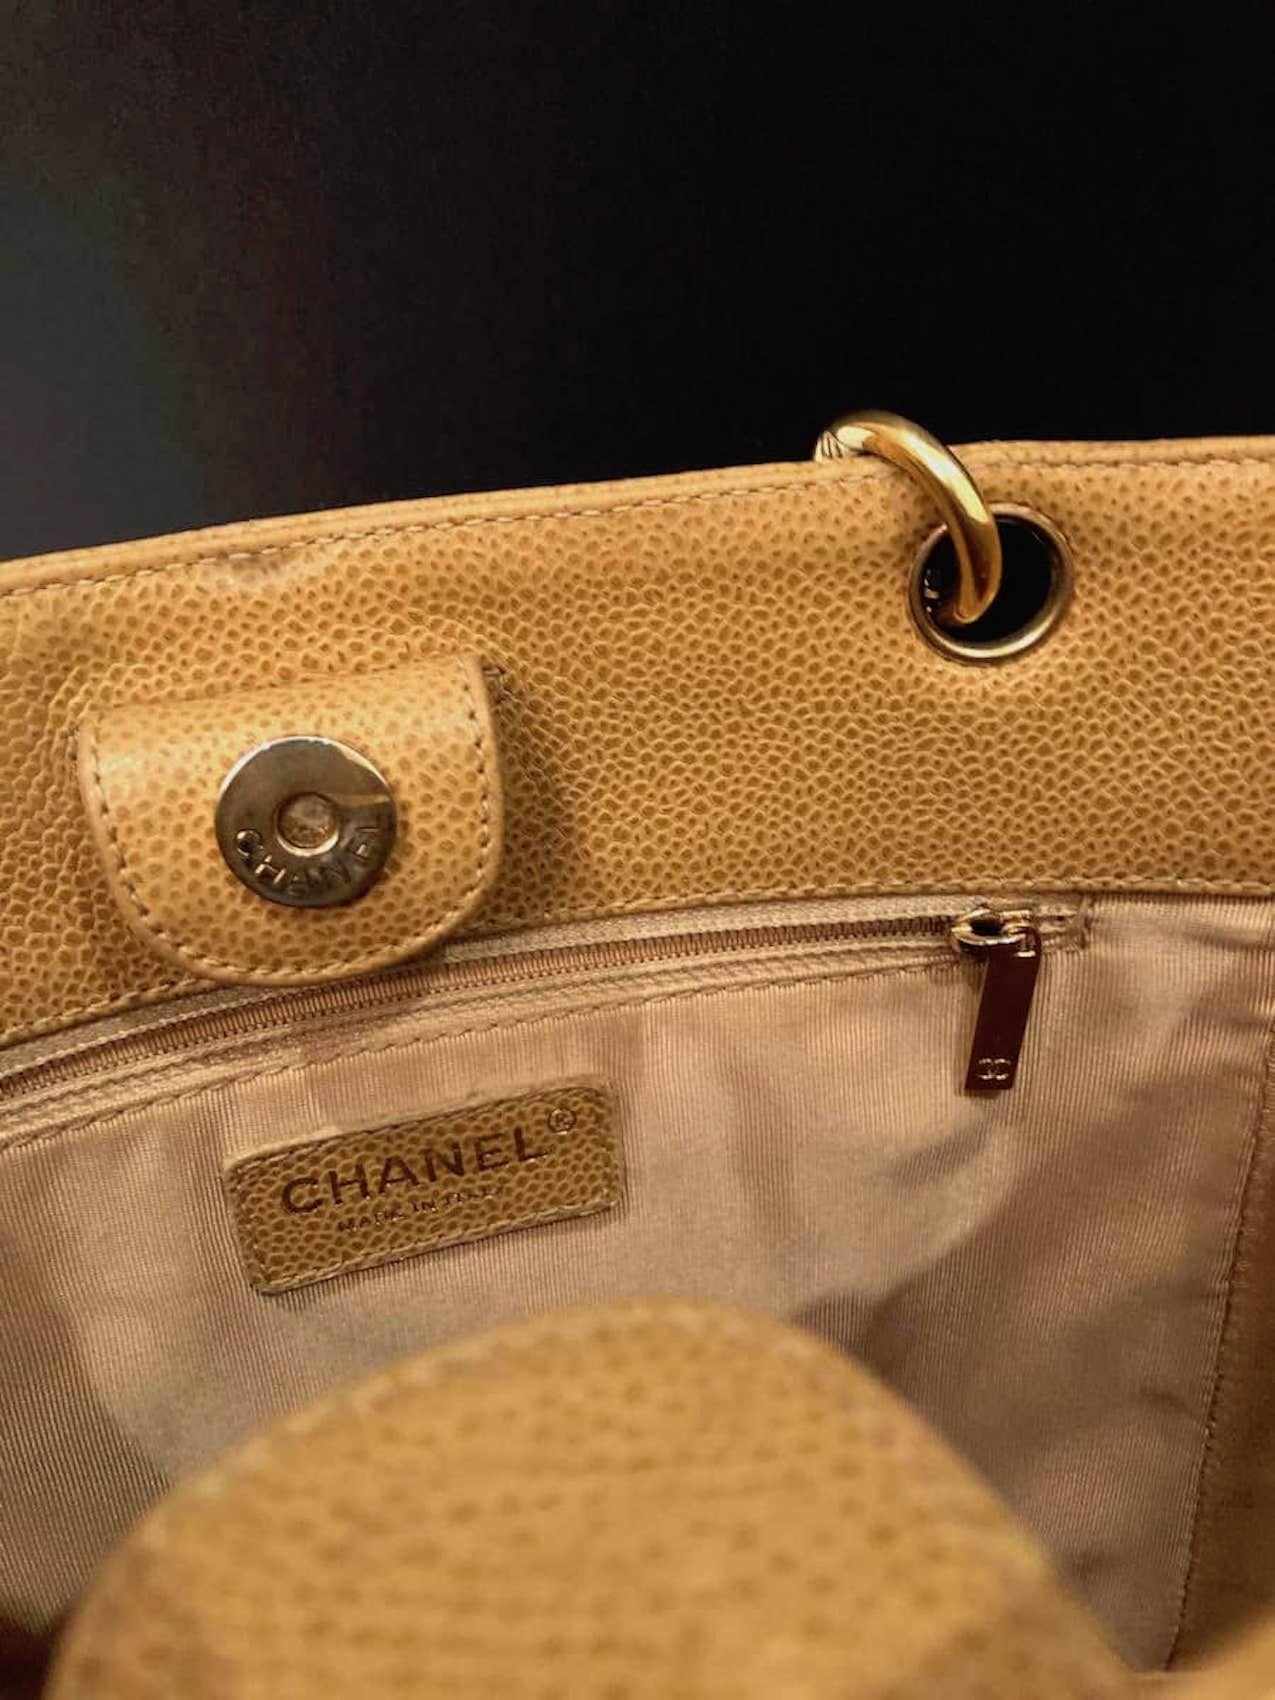 CHANEL Small Petit Shopping Tote Bag Gold Tone Caviar Leather in Camel Beige  5